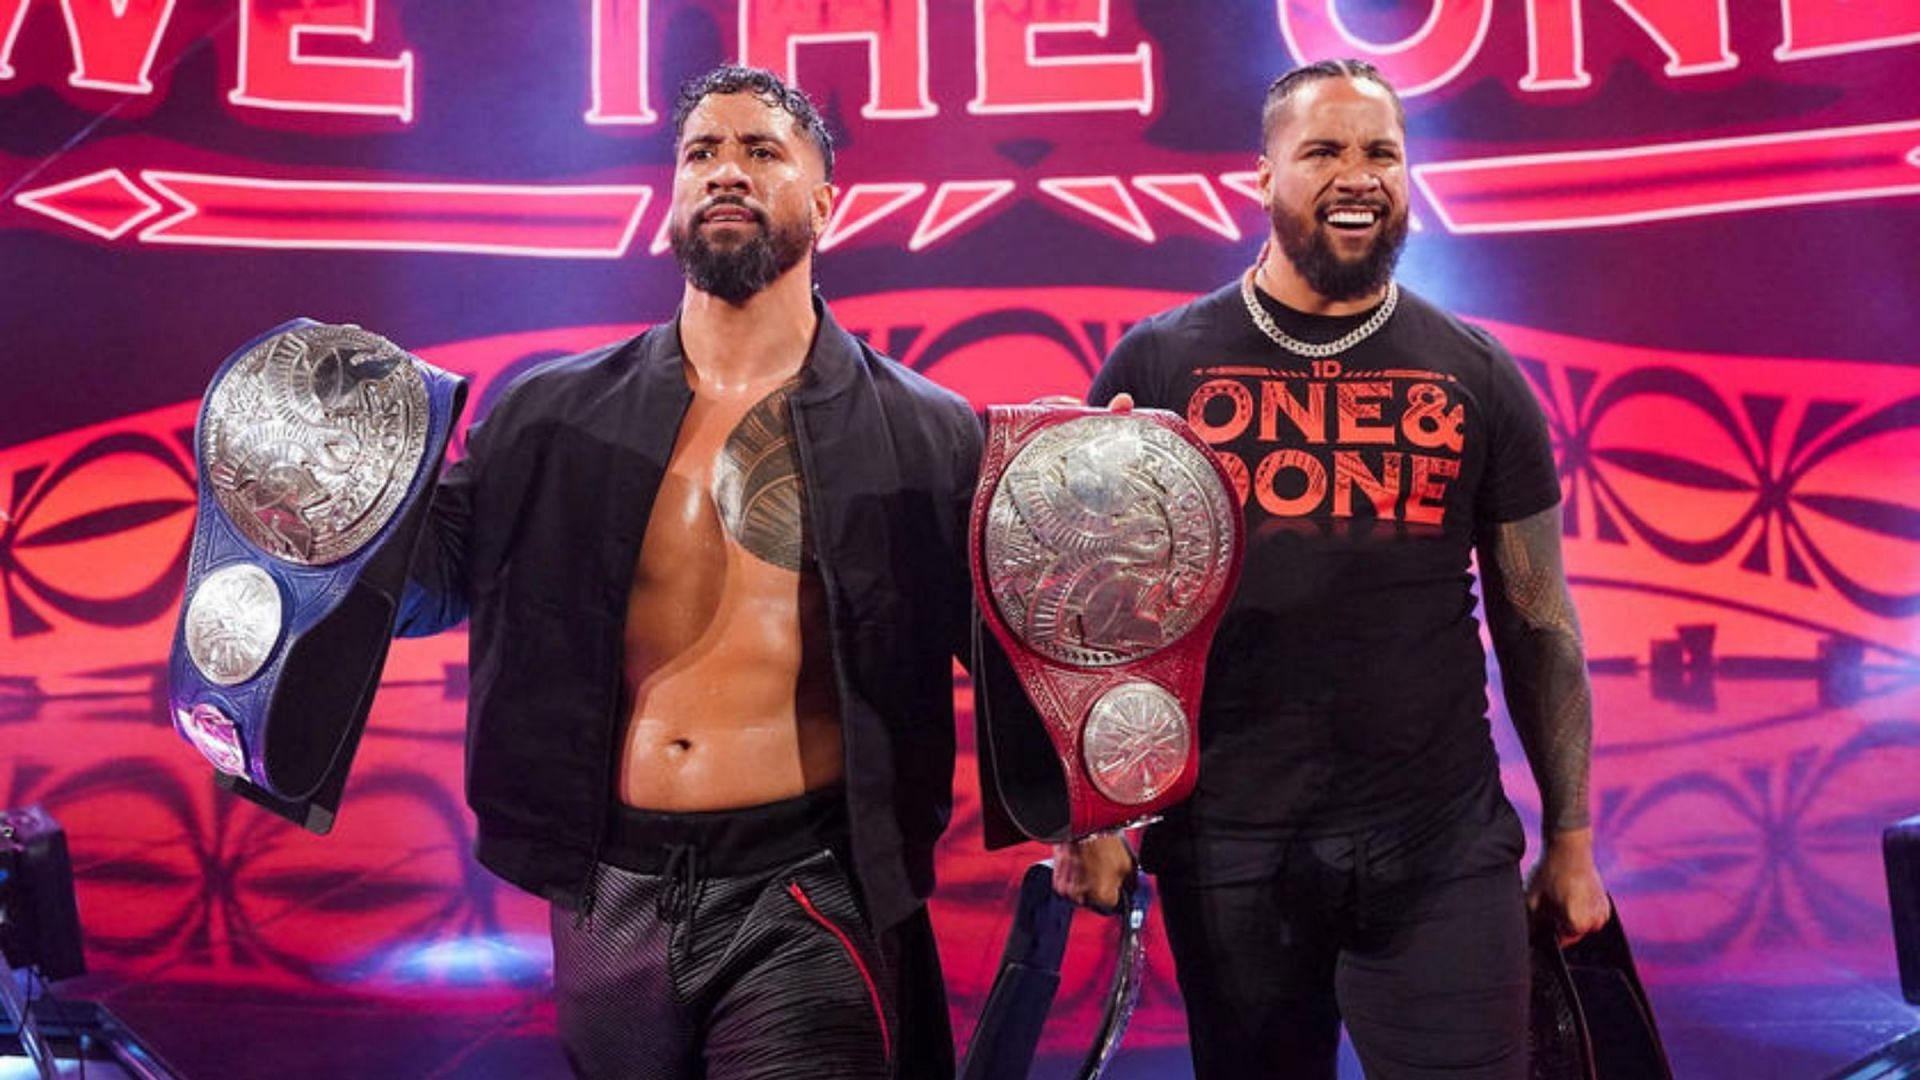 The Usos are the longest reigning tag team champions of all time